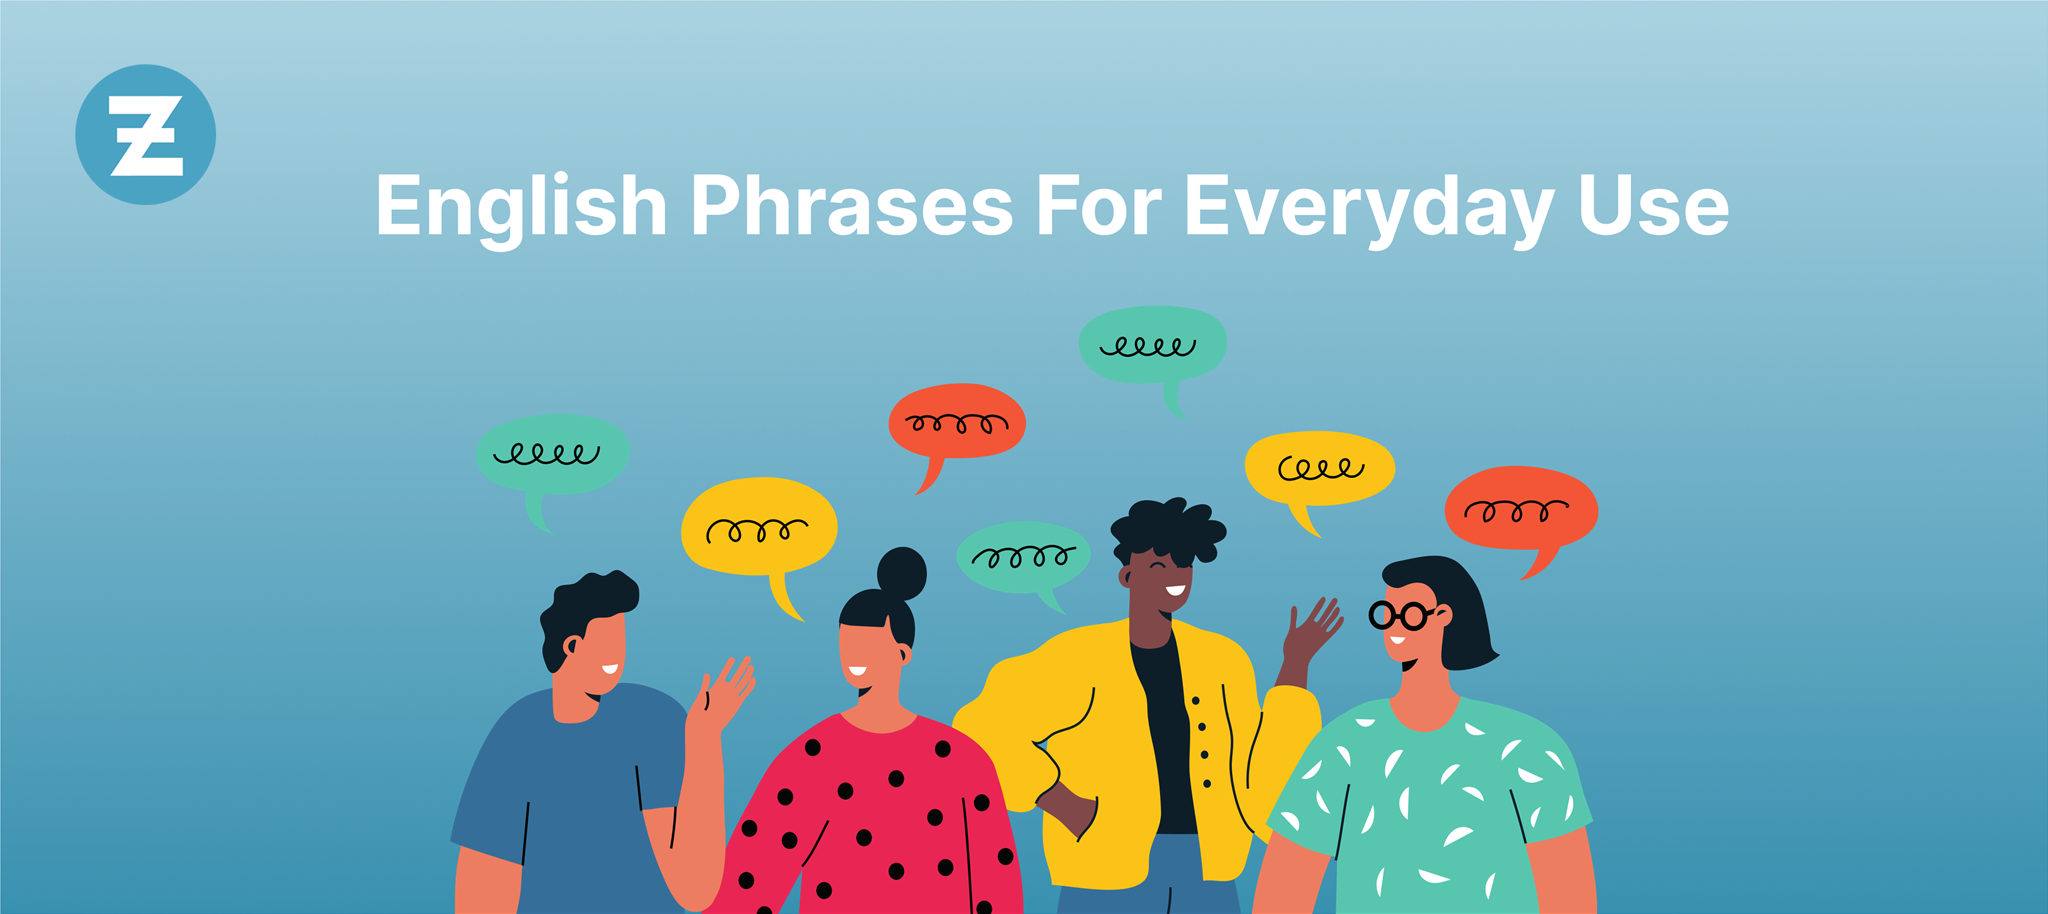 Common English Phrases for Everyday Use | Zoundslike